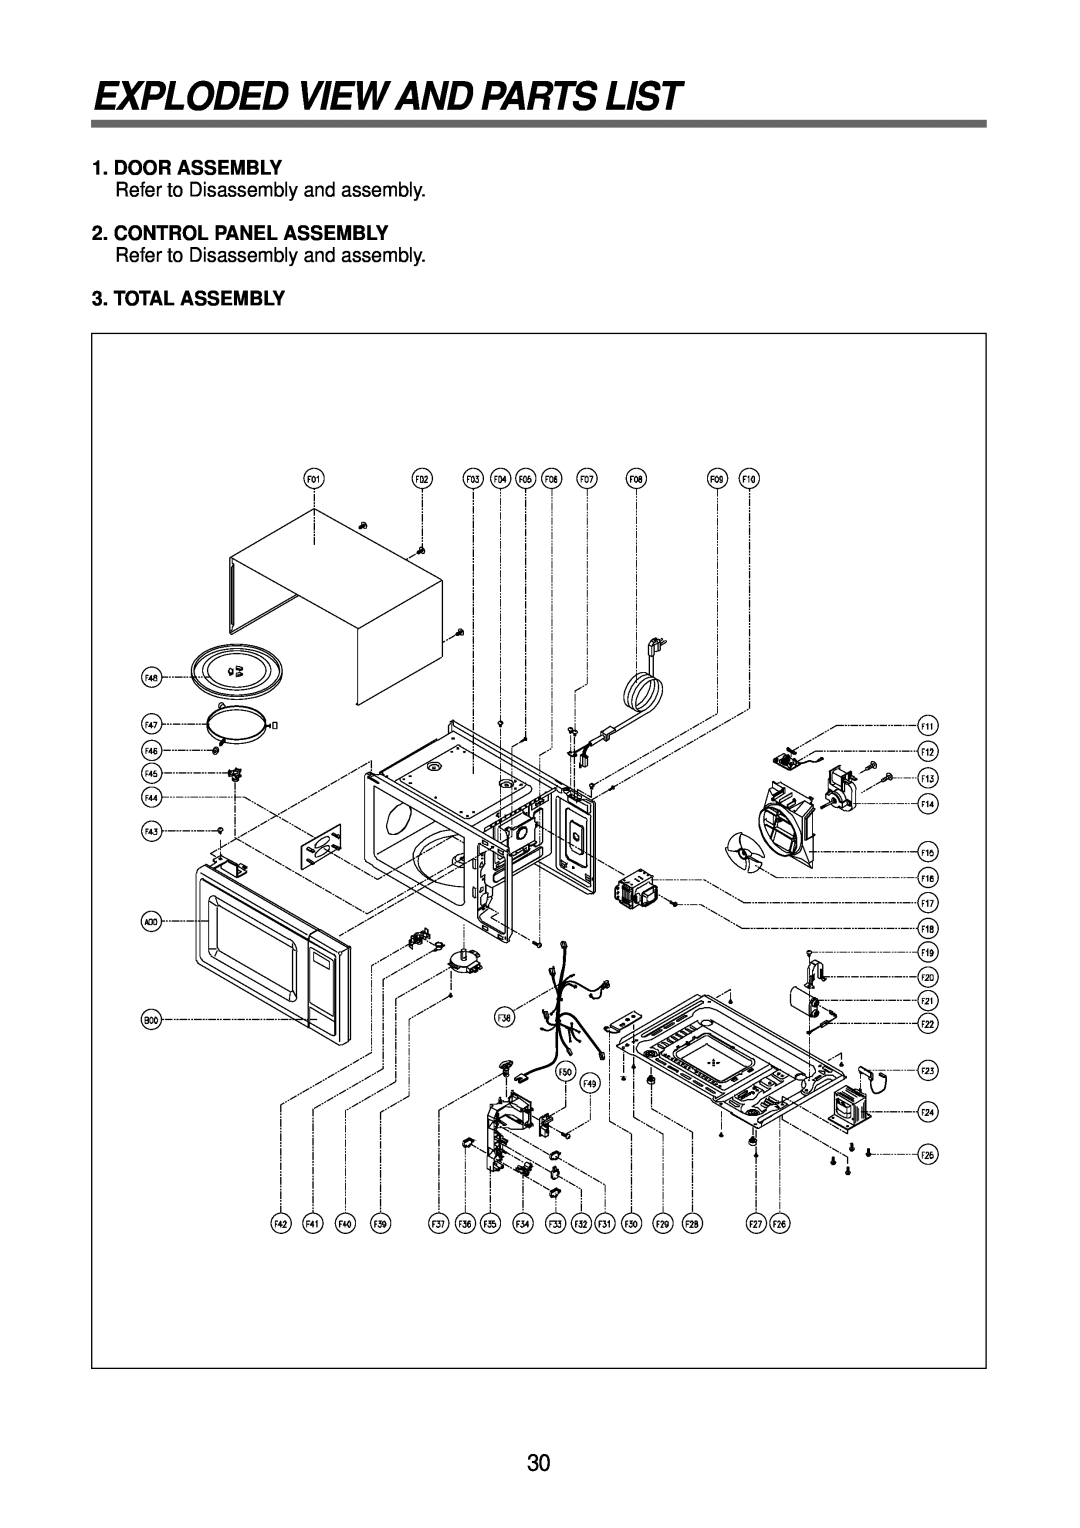 Daewoo KOR-63DB0S Exploded View And Parts List, Door Assembly, Refer to Disassembly and assembly, Total Assembly 